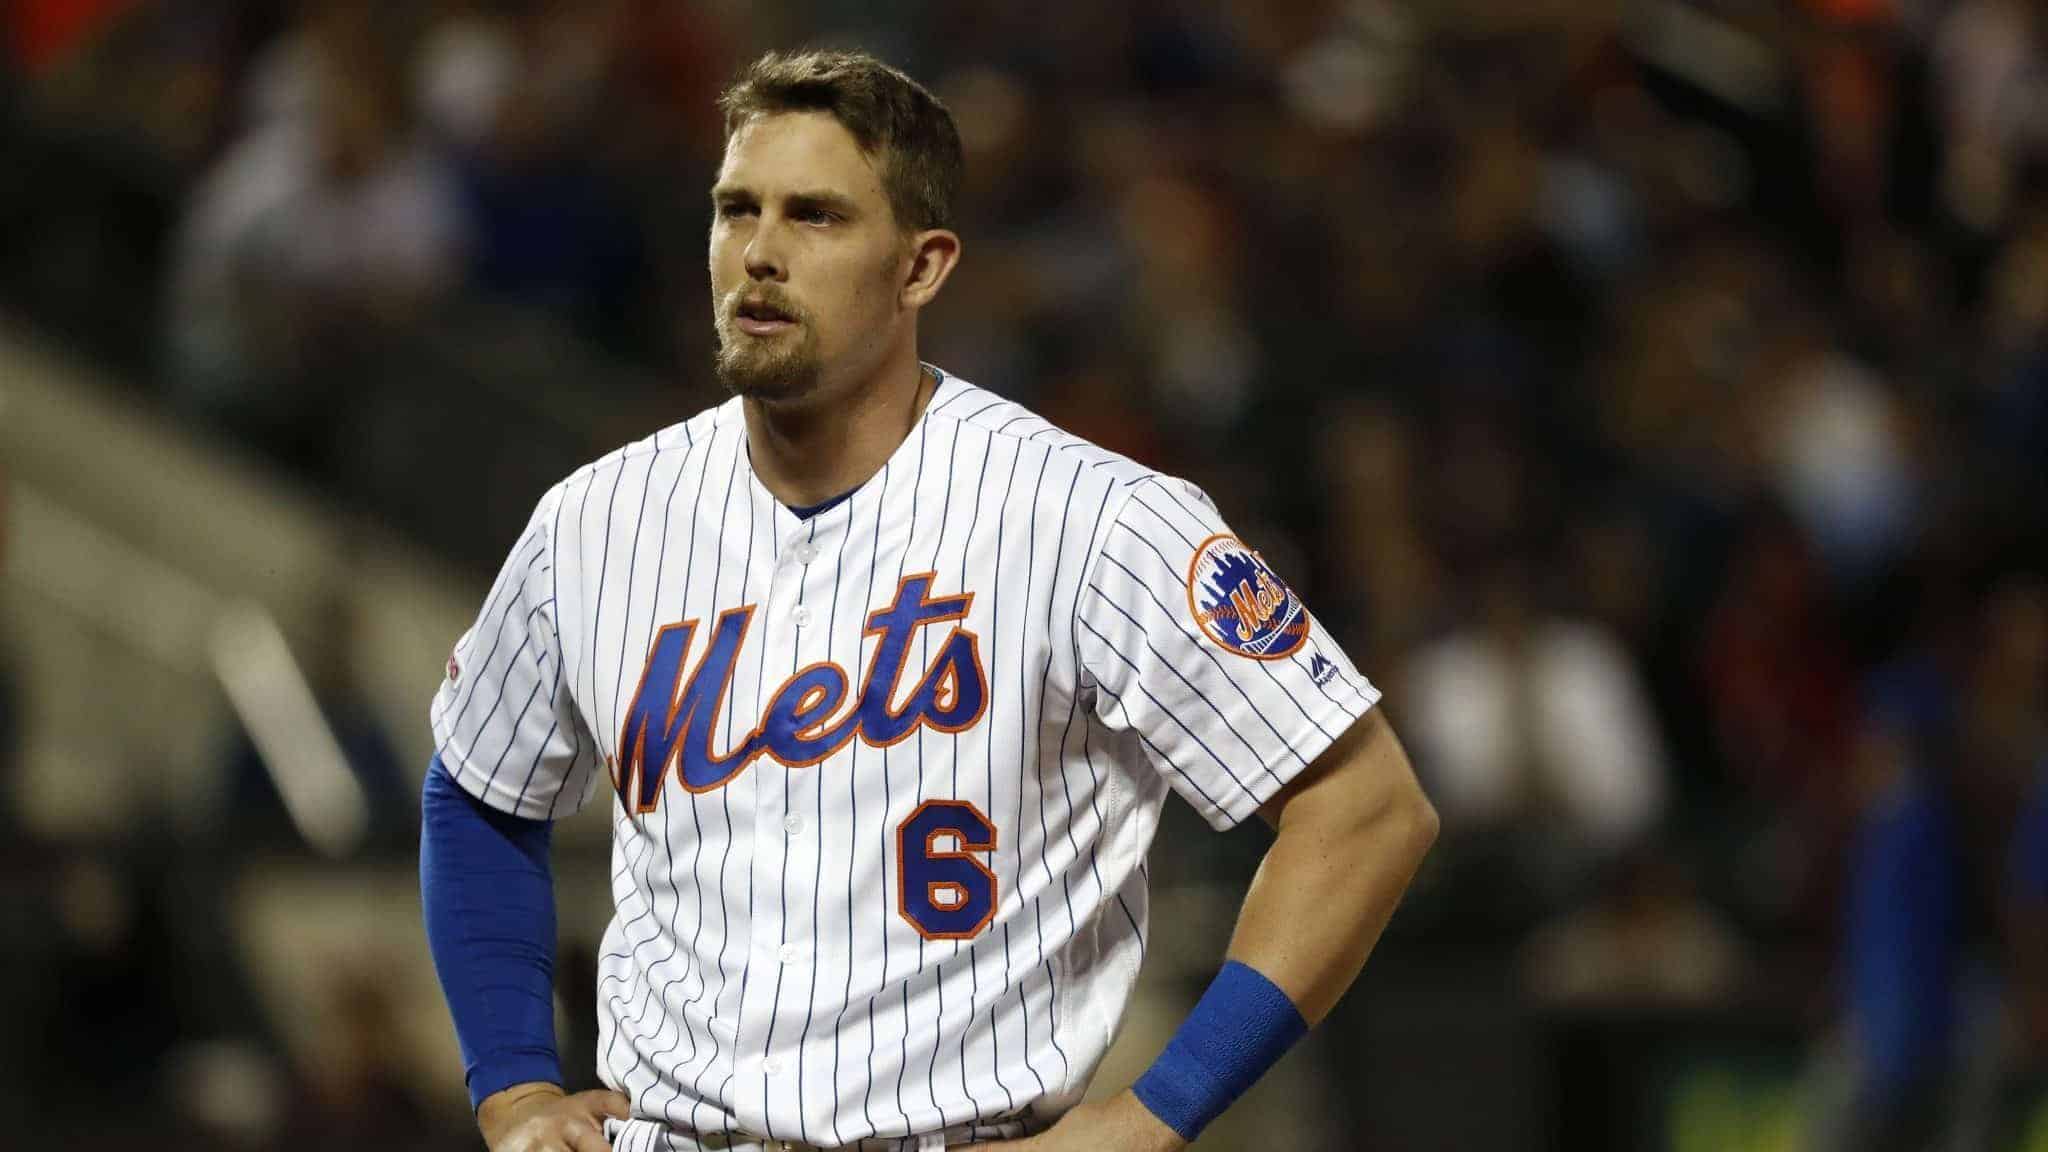 NEW YORK, NEW YORK - JUNE 04: Jeff McNeil #6 of the New York Mets reacts after striking out against the San Francisco Giants during the fifith inning at Citi Field on June 04, 2019 in New York City.